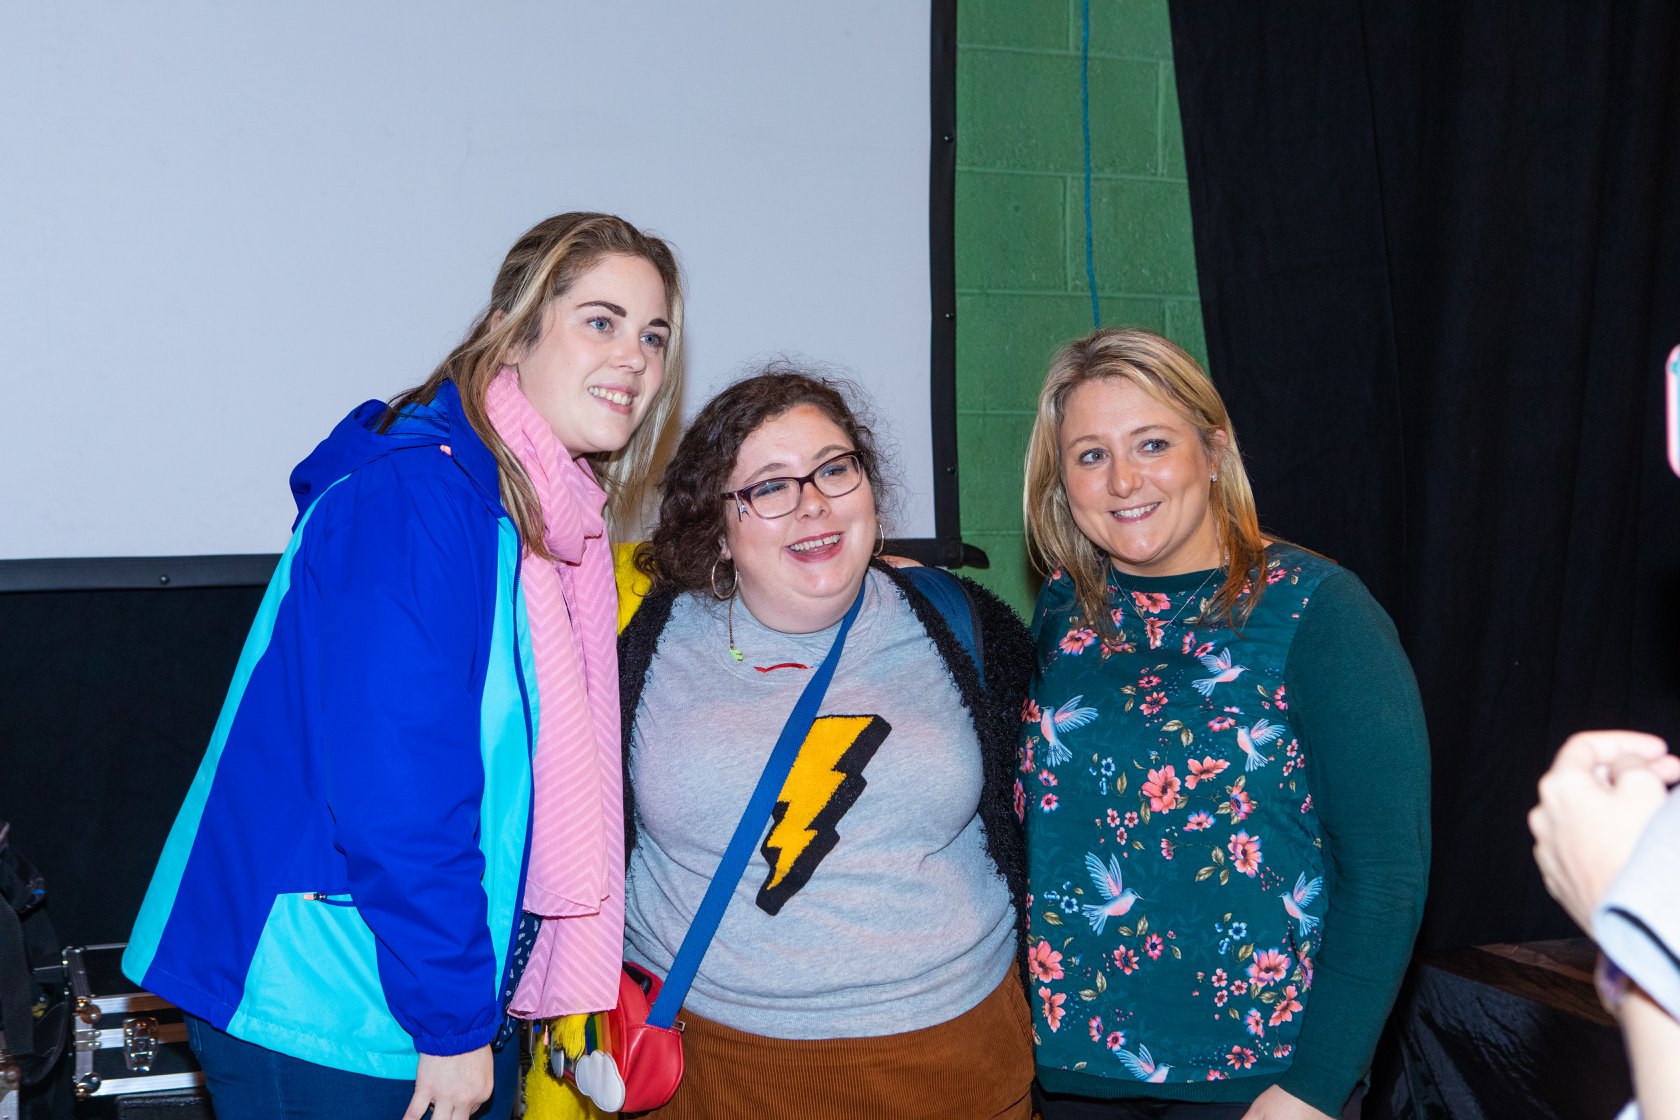 Alison Spittle taking a photo with students at YABF 2018